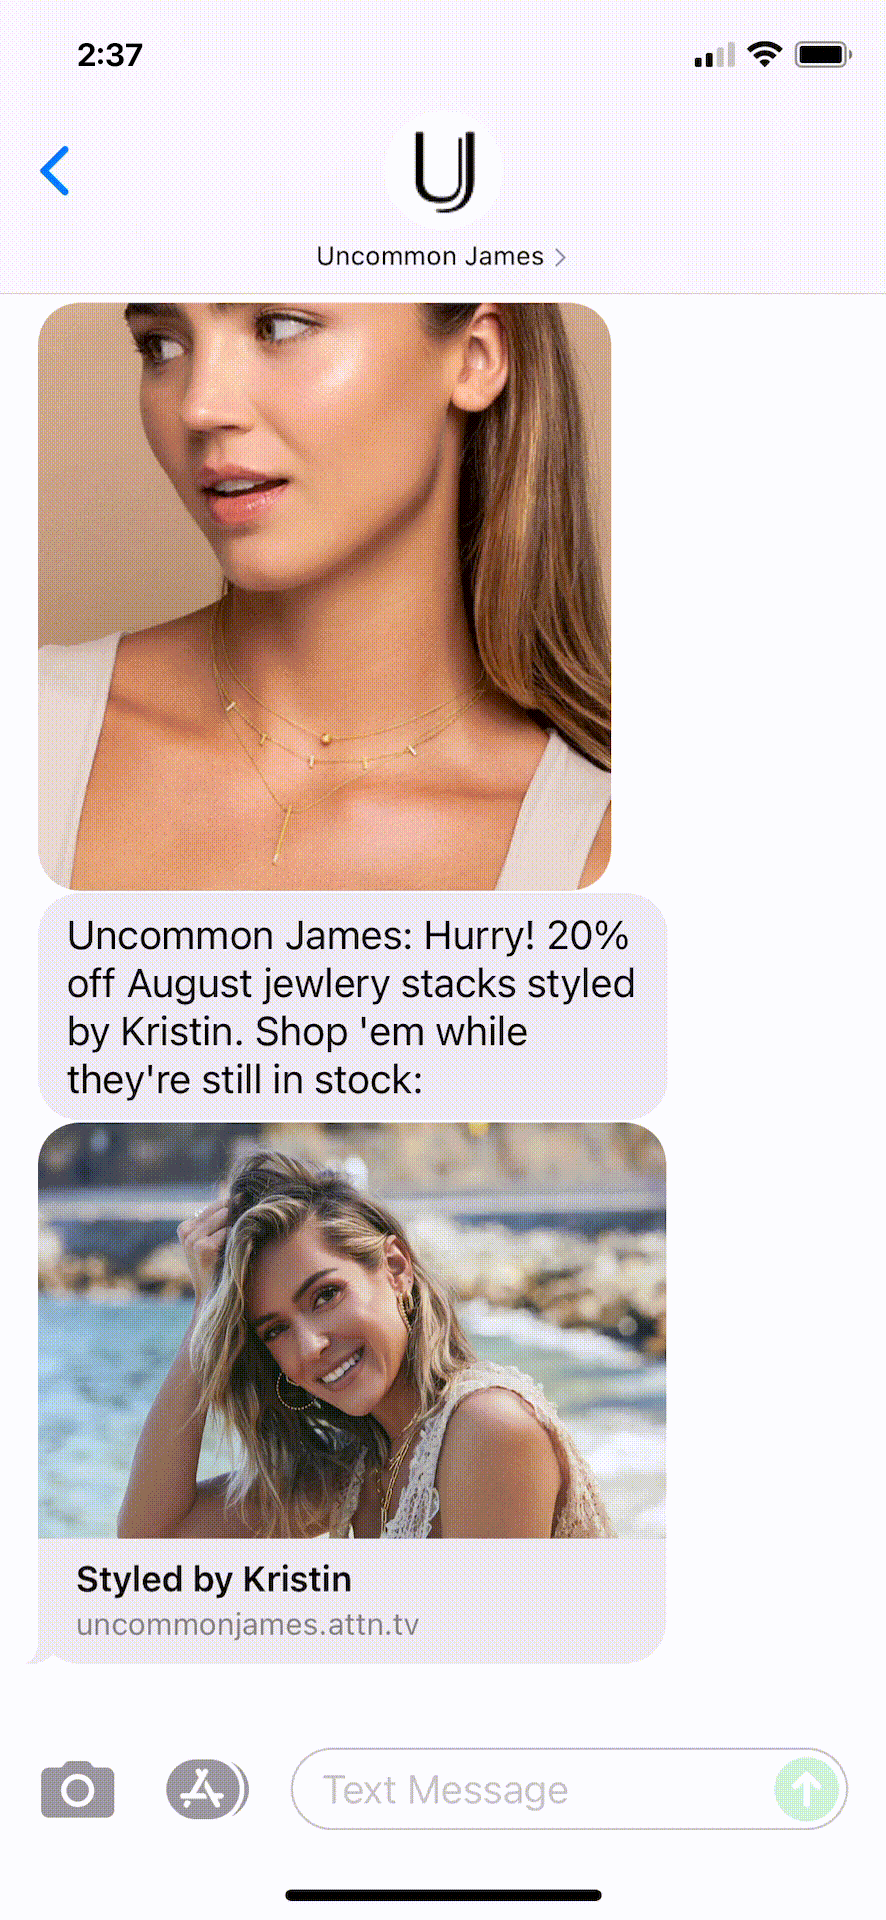 Uncommon-James-Text-Message-Marketing-Example-08.06.2021